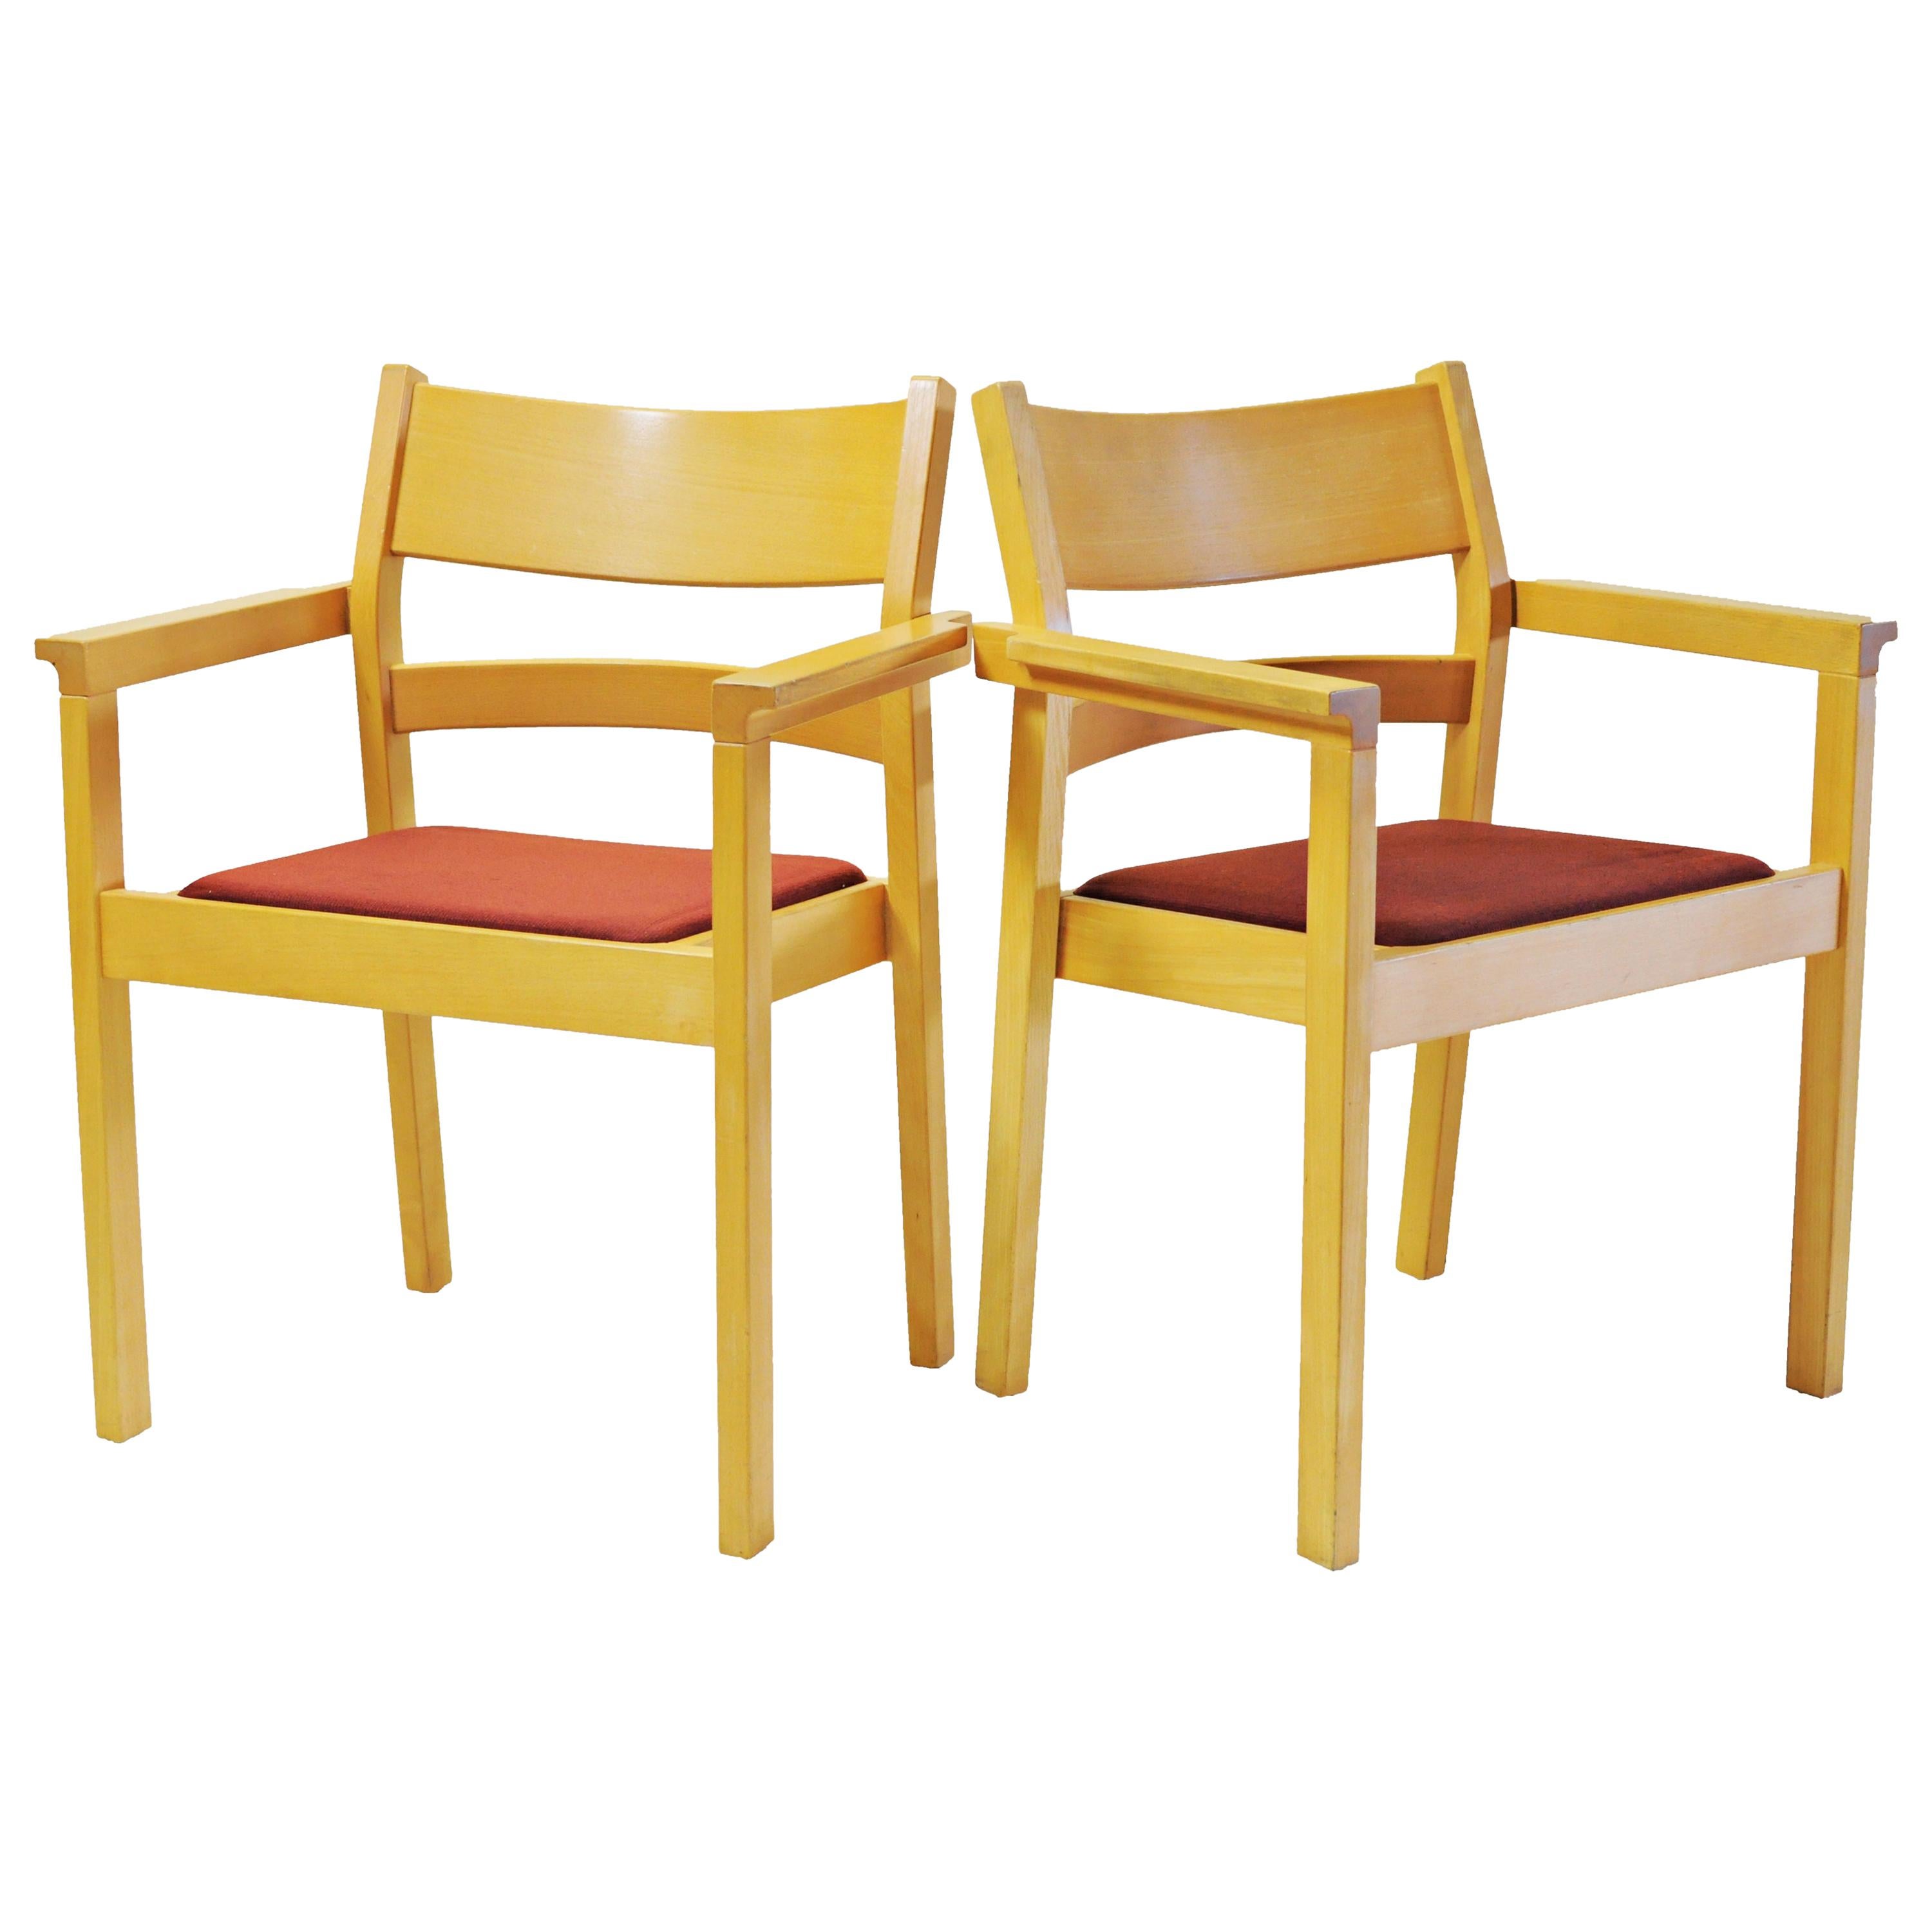 Set of Two Refinished Hans J. Wegner Armchairs in Beech, Choice of Upholstery